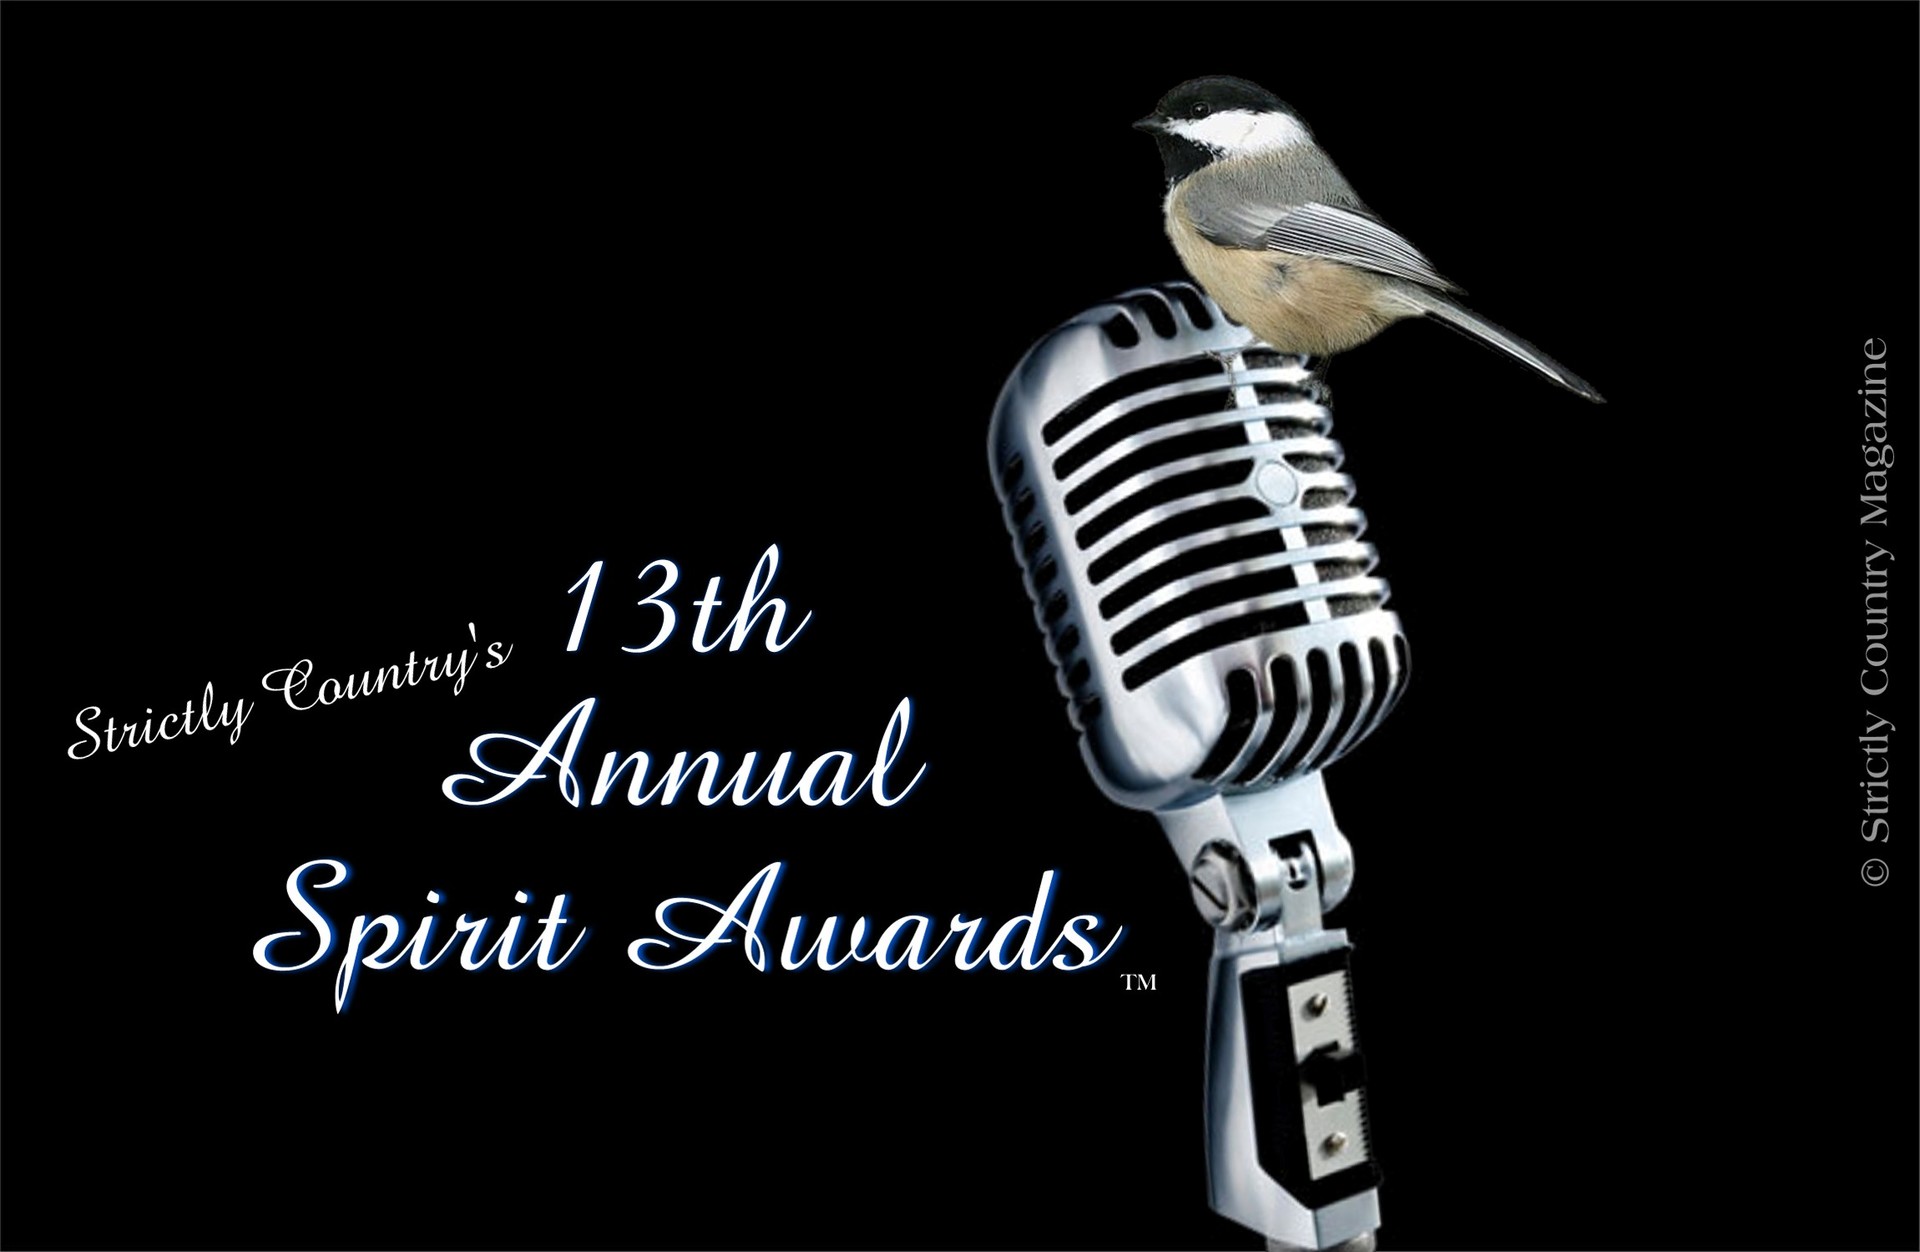 Strictly Country Magazine copyright 13th Annual Spirit Awards official logo